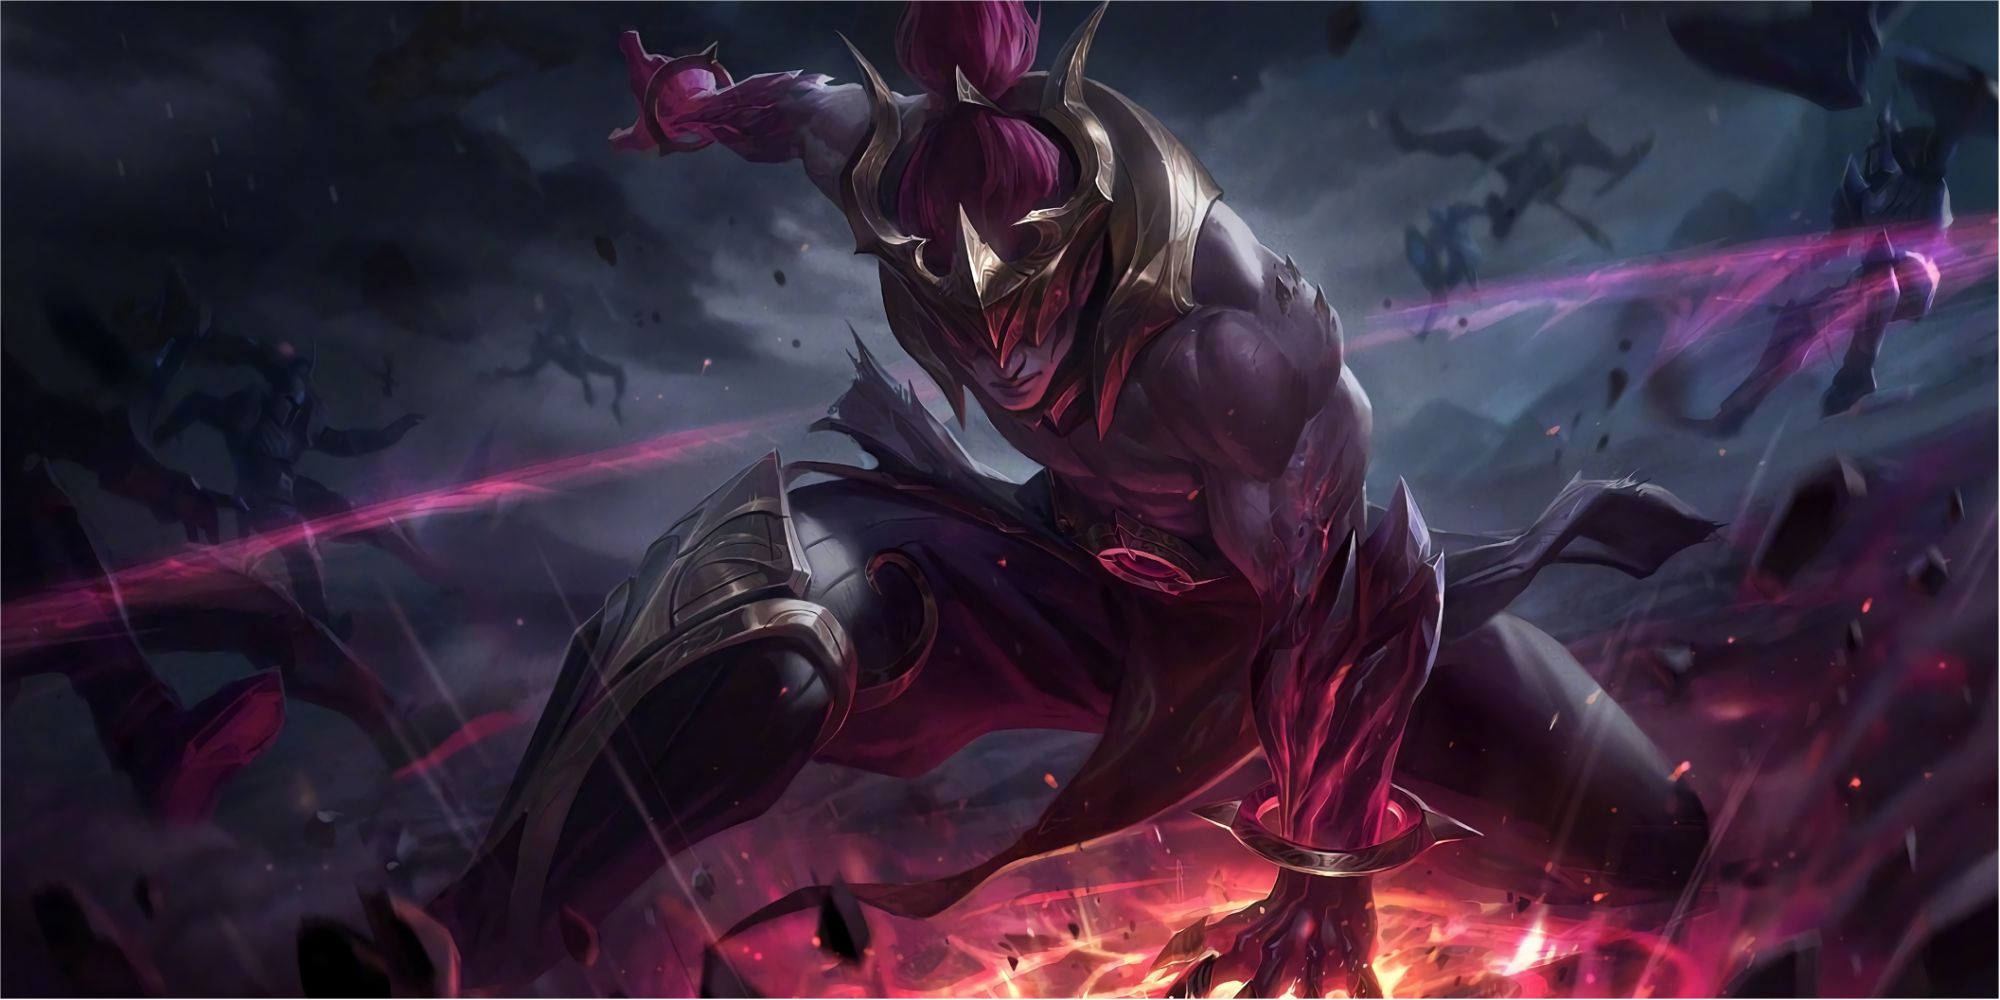 Nightbringer Lee Sin with his palm firmly planted in the ground, the earth alight with fiery light and cracks beneath